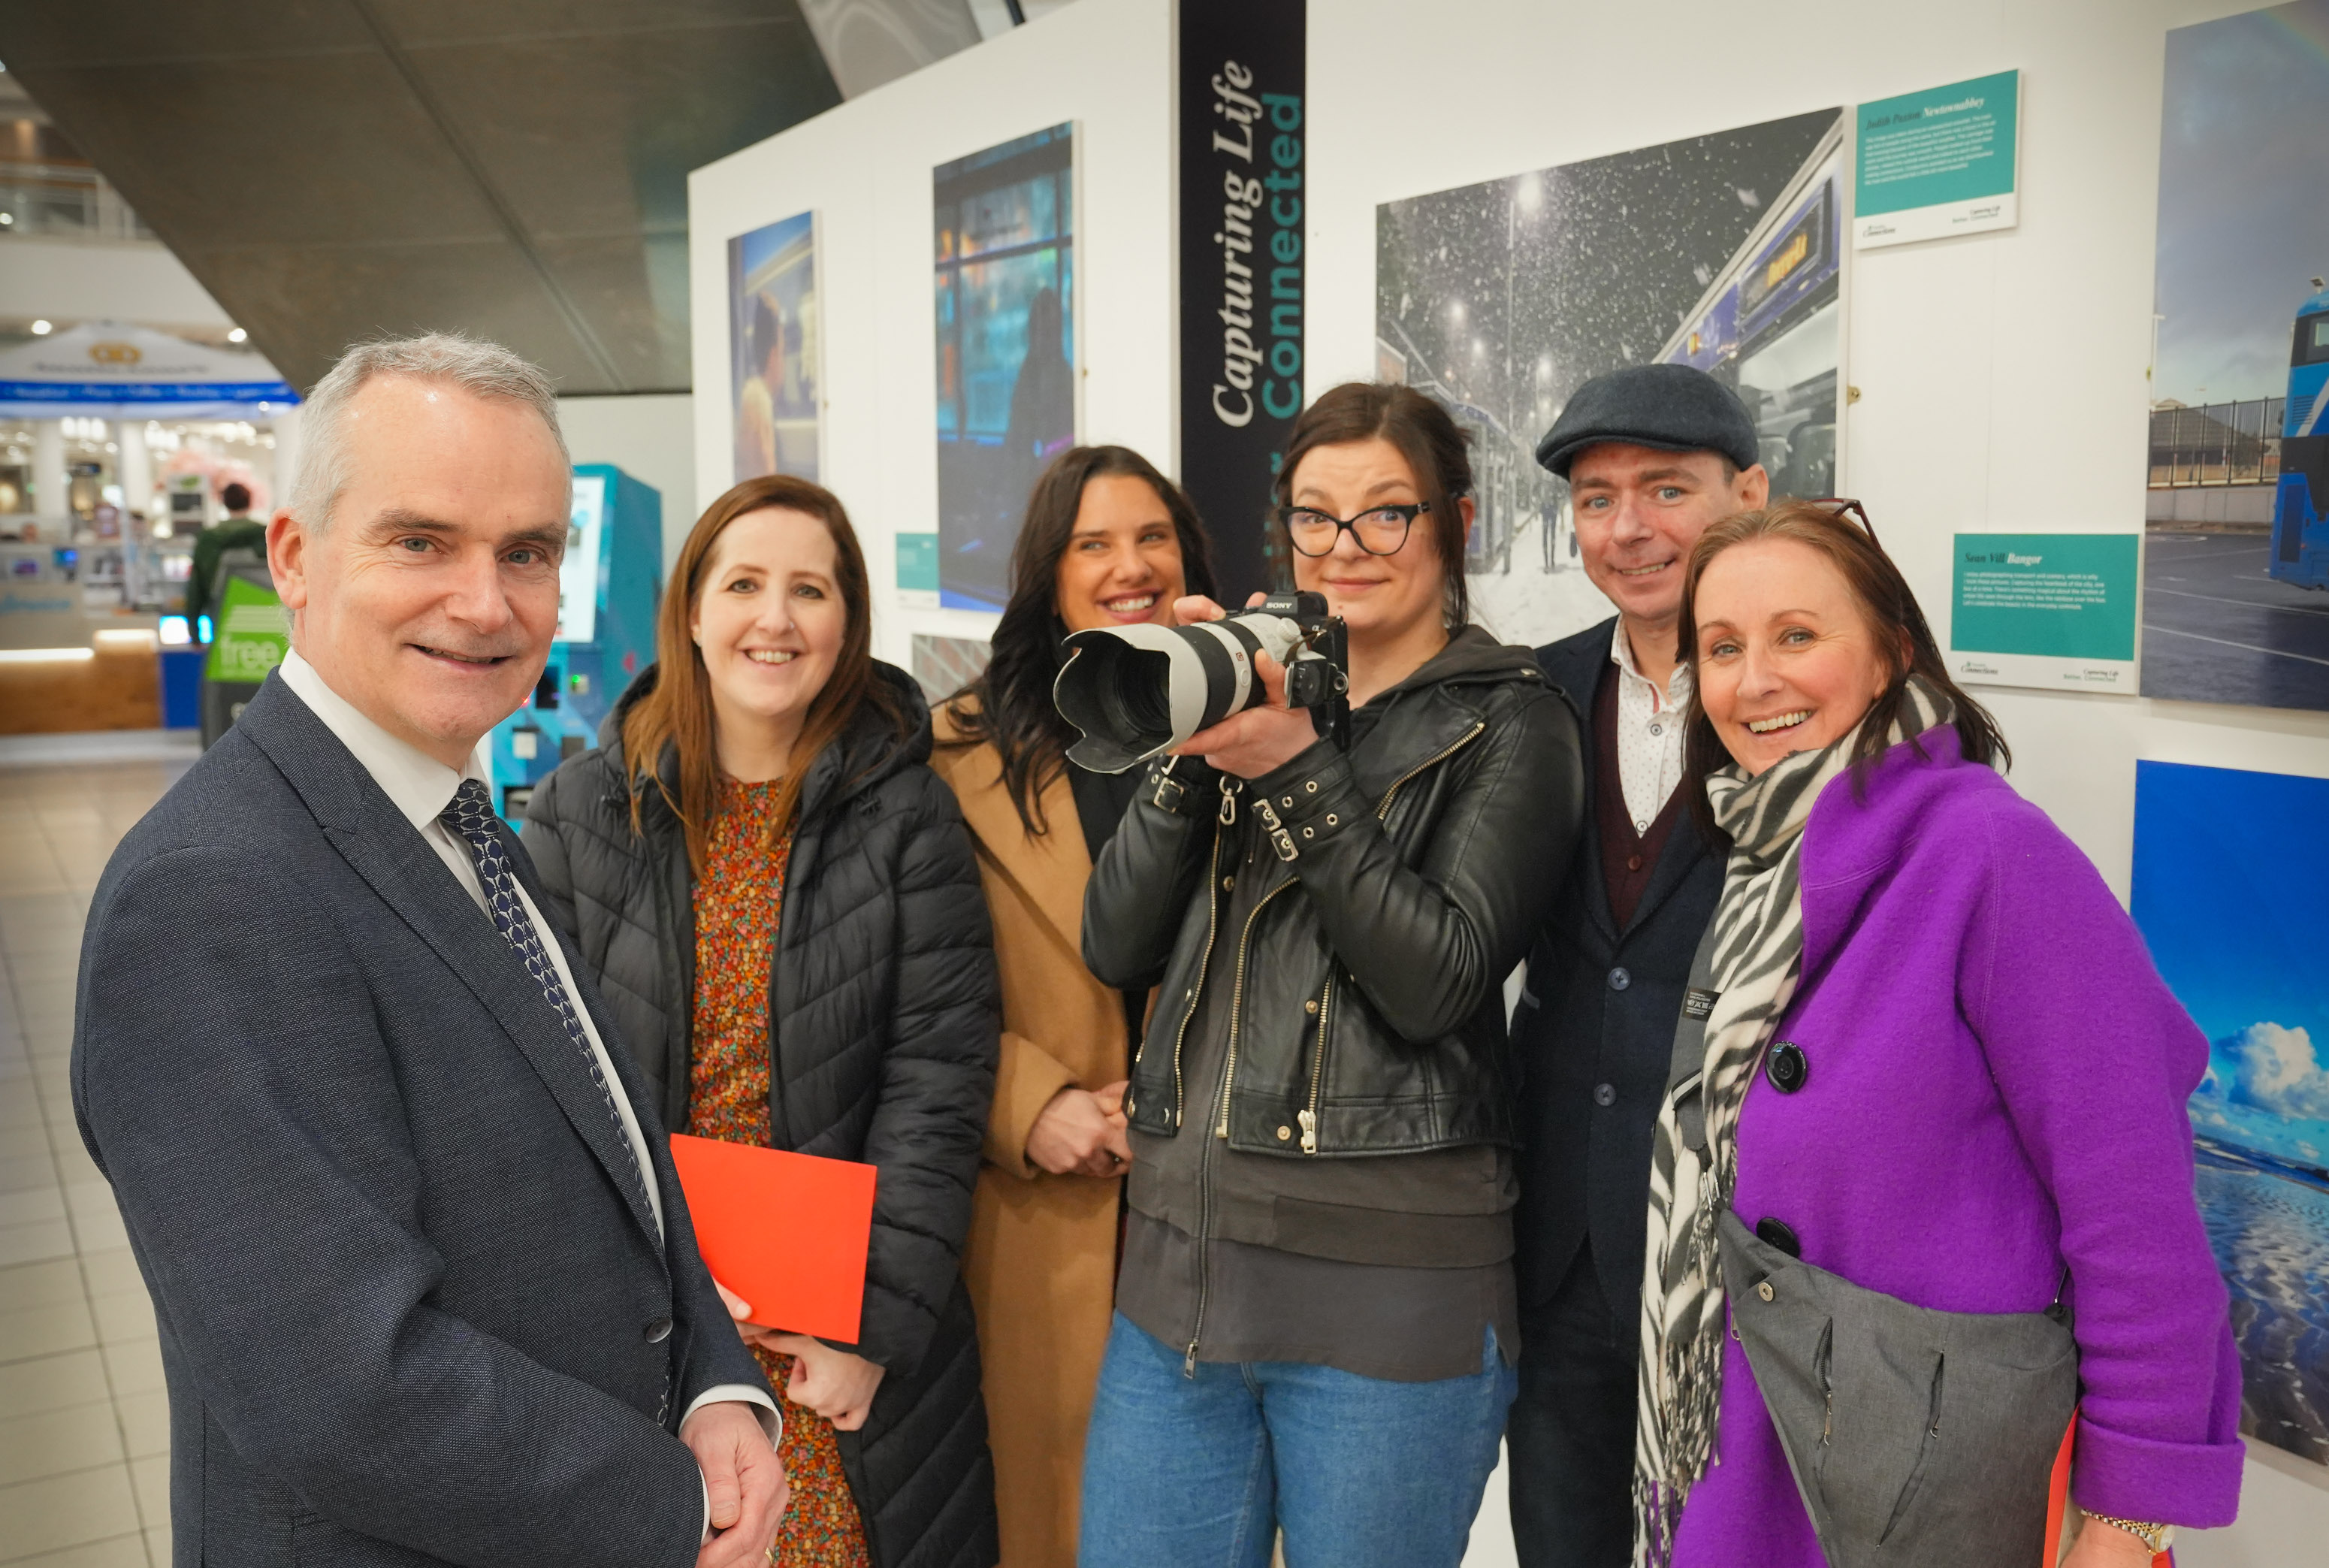 Translink CEO Chris Conway at the Connection photo exhibition